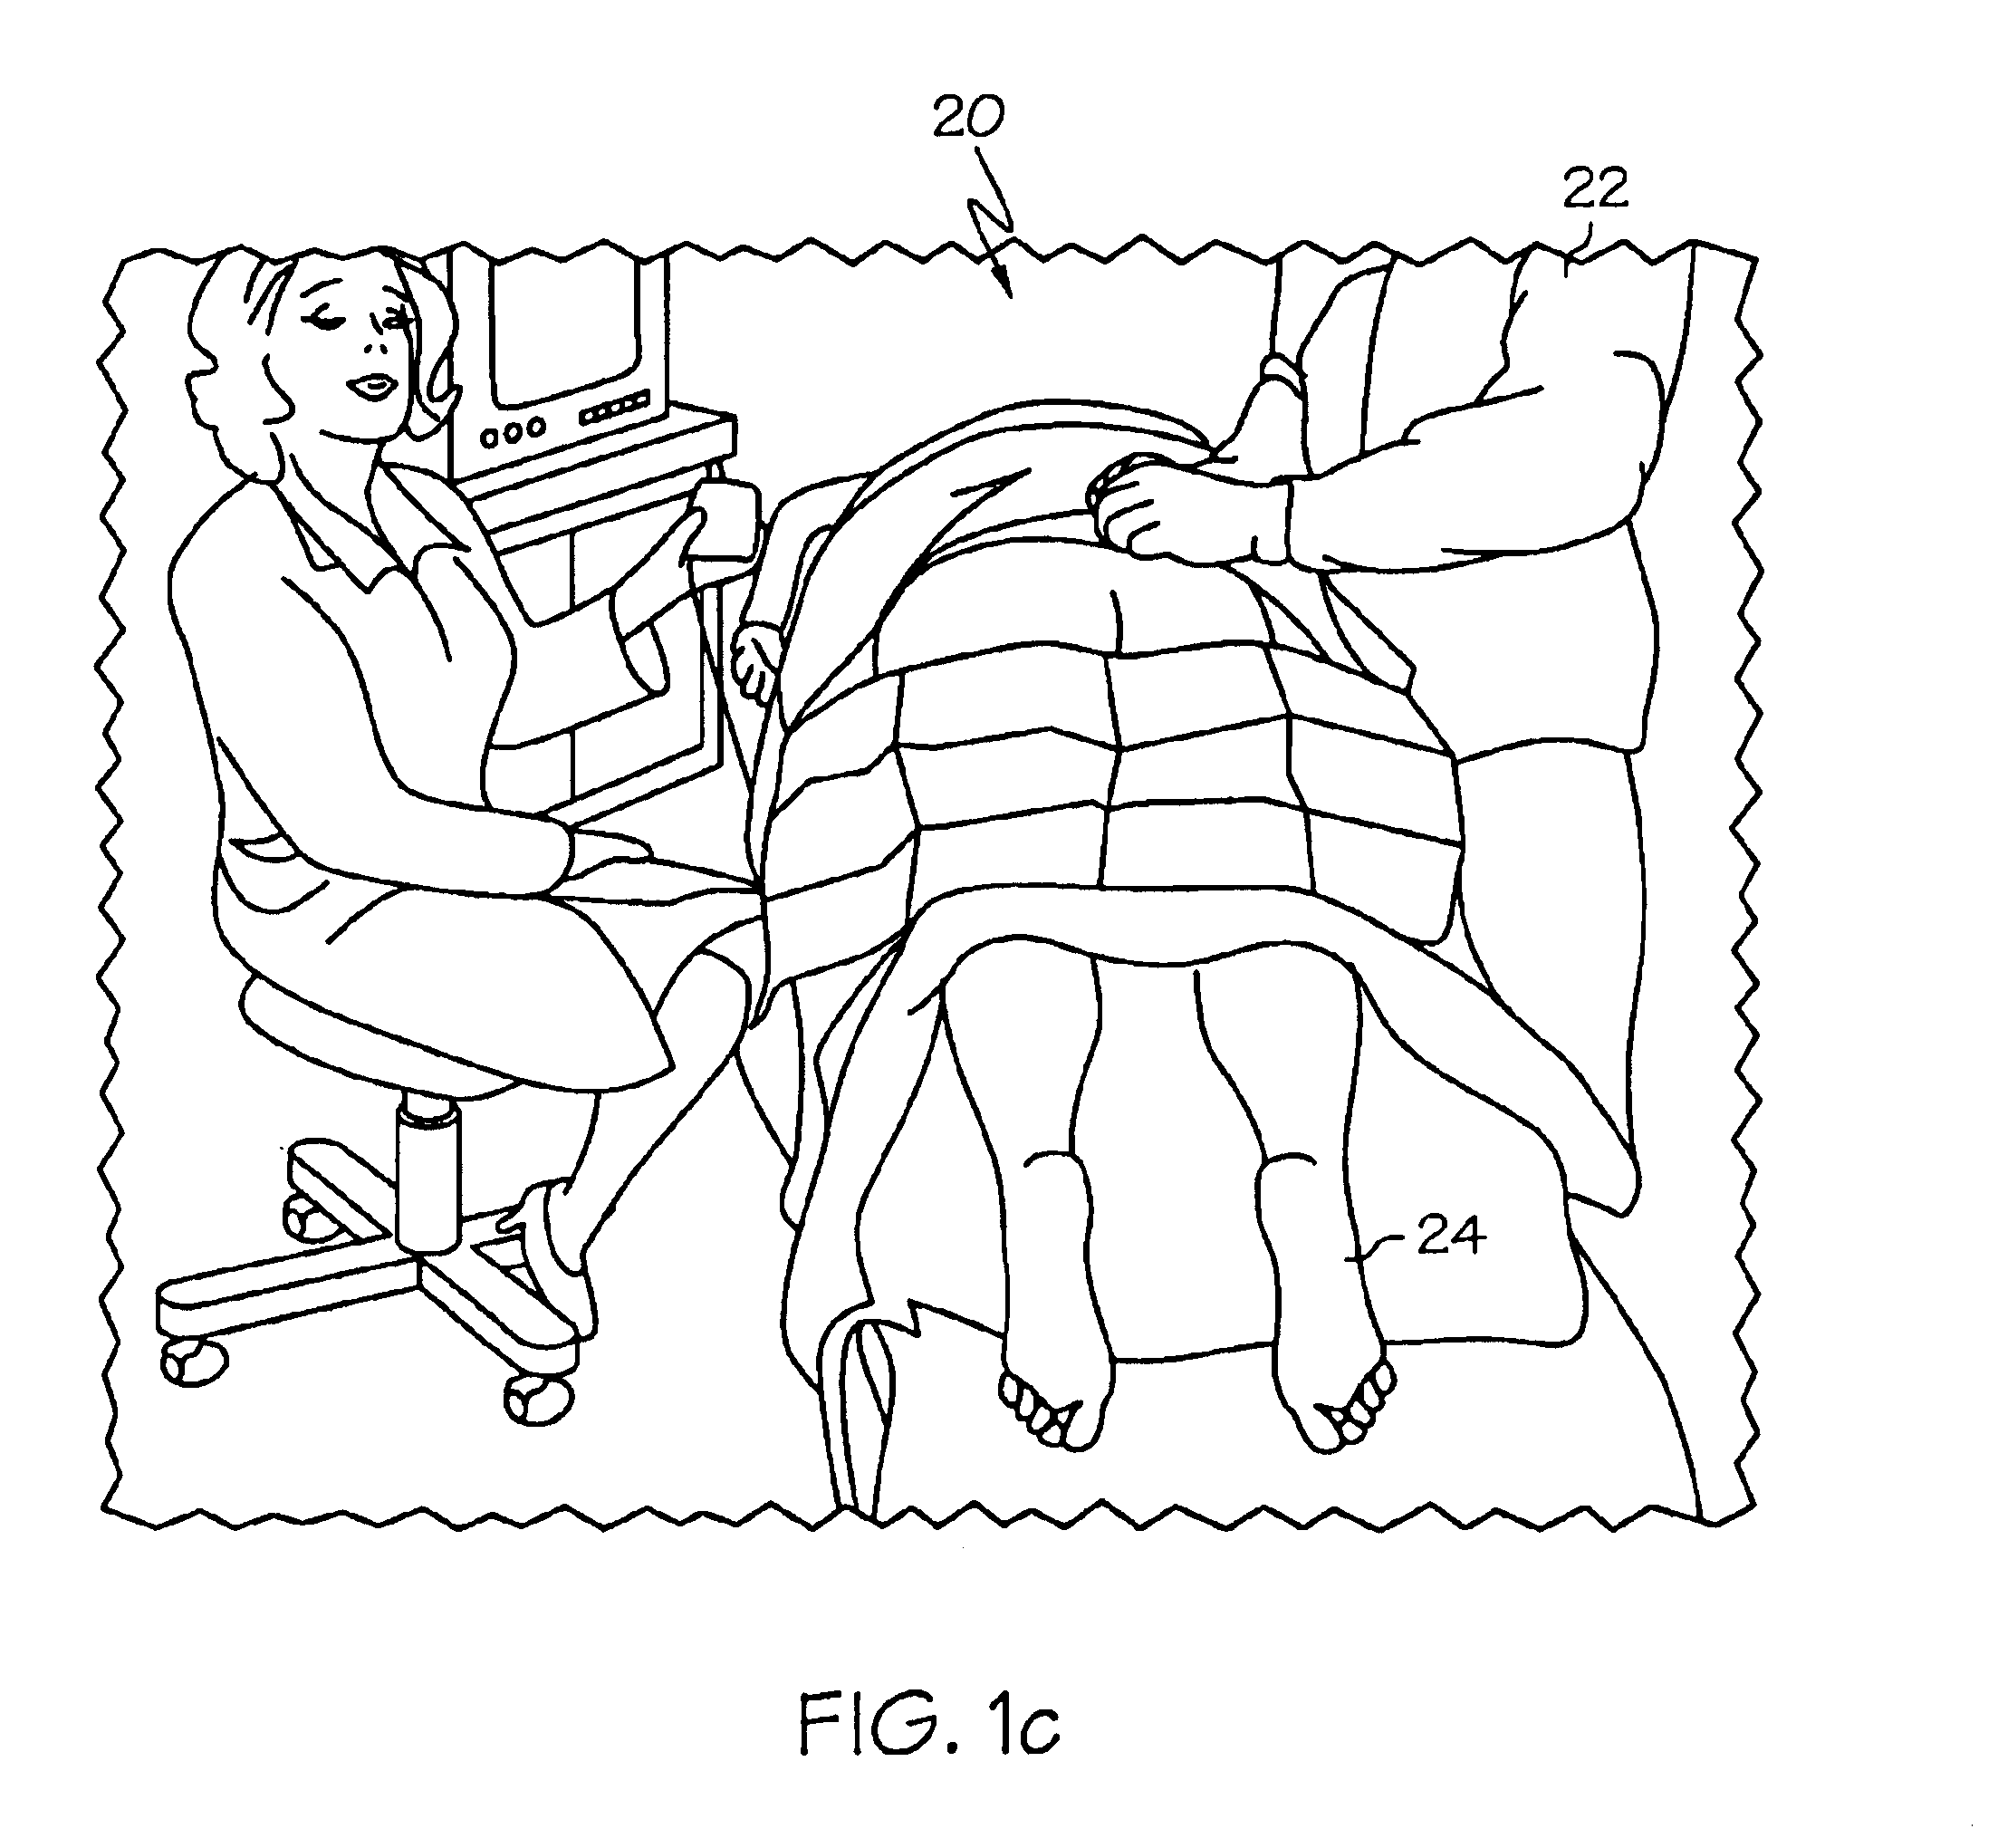 Minimally invasive apparatus for implanting a sacral stimulation lead